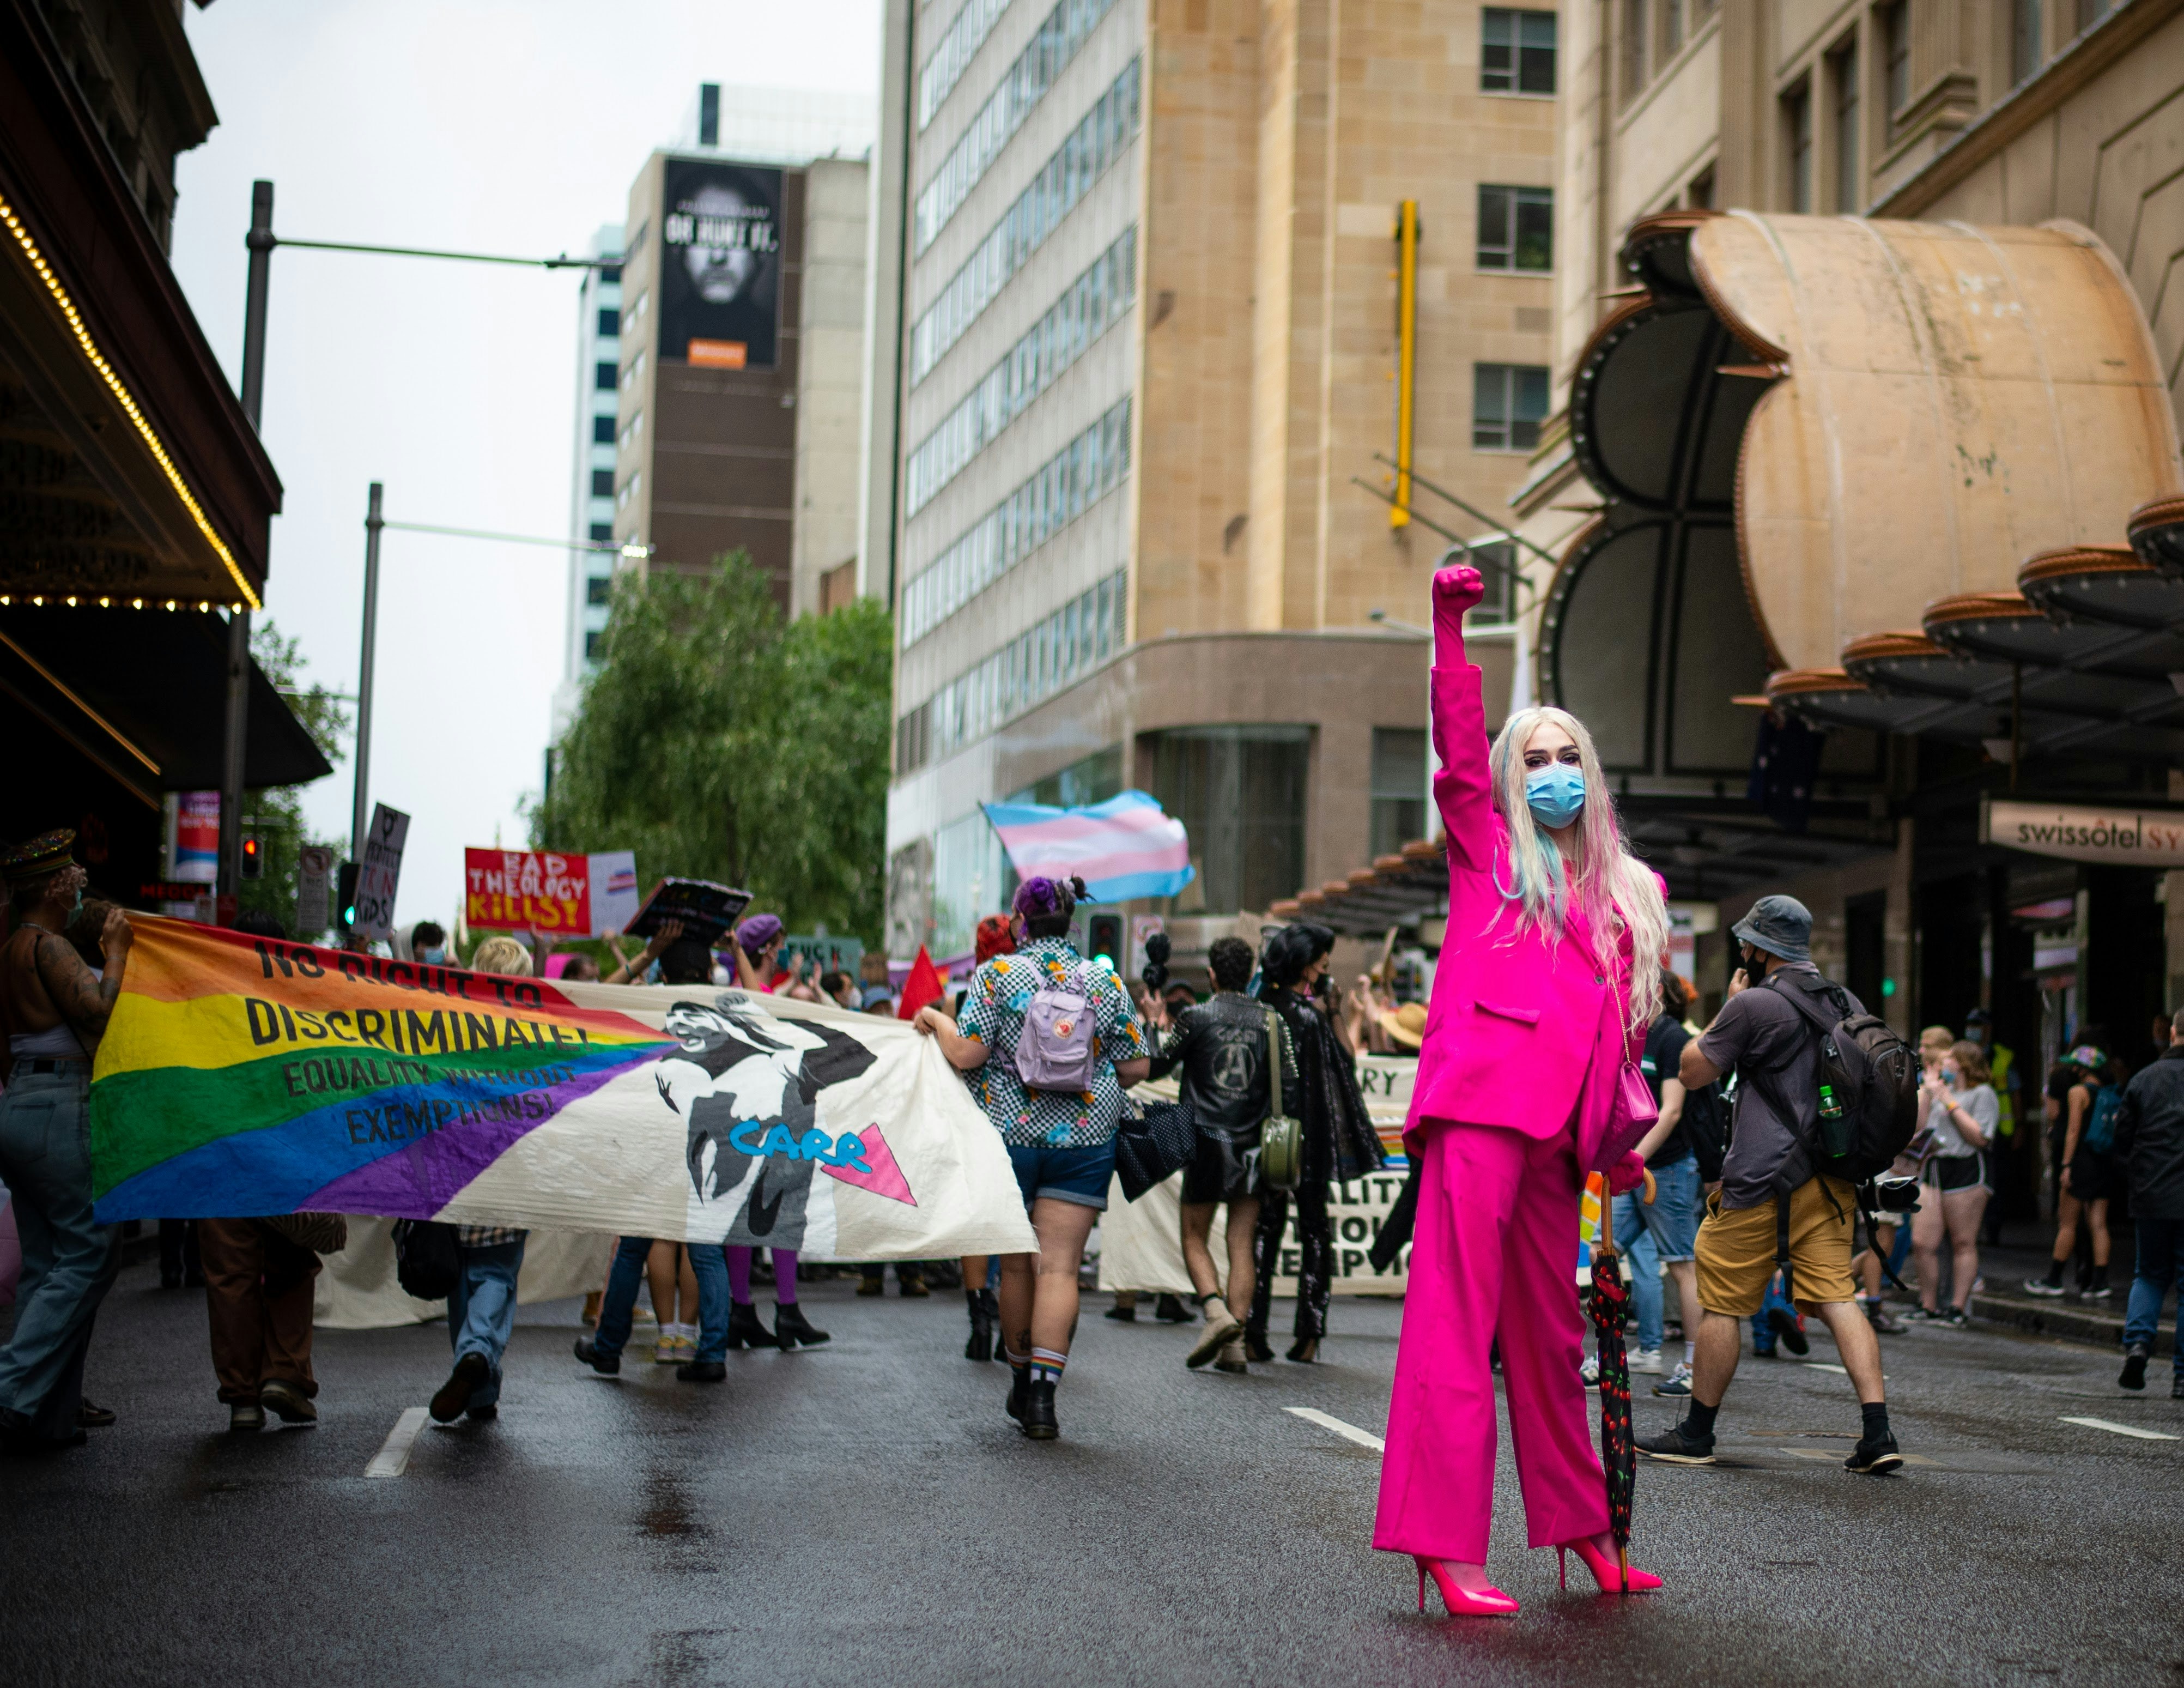 Protest of the Religious Discrimination Bill by LGBTQI+ Activists in Sydney, Australia (Feb 12, 2022)